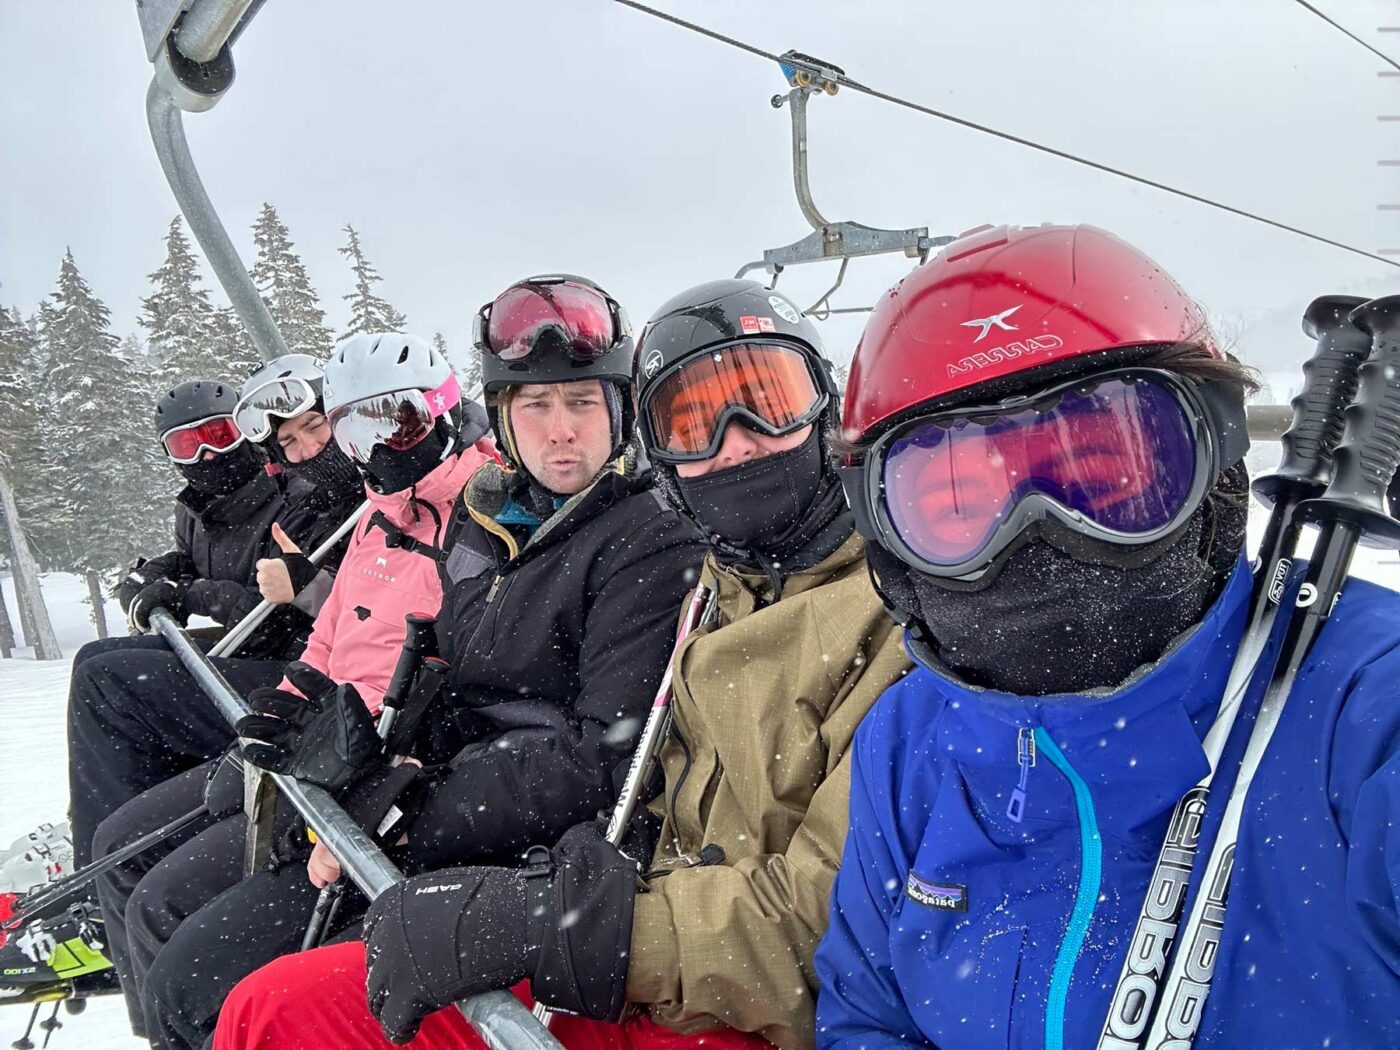 Mackenzie Wensauer sits on a ski lift with her friends, in the snow and pow pow.